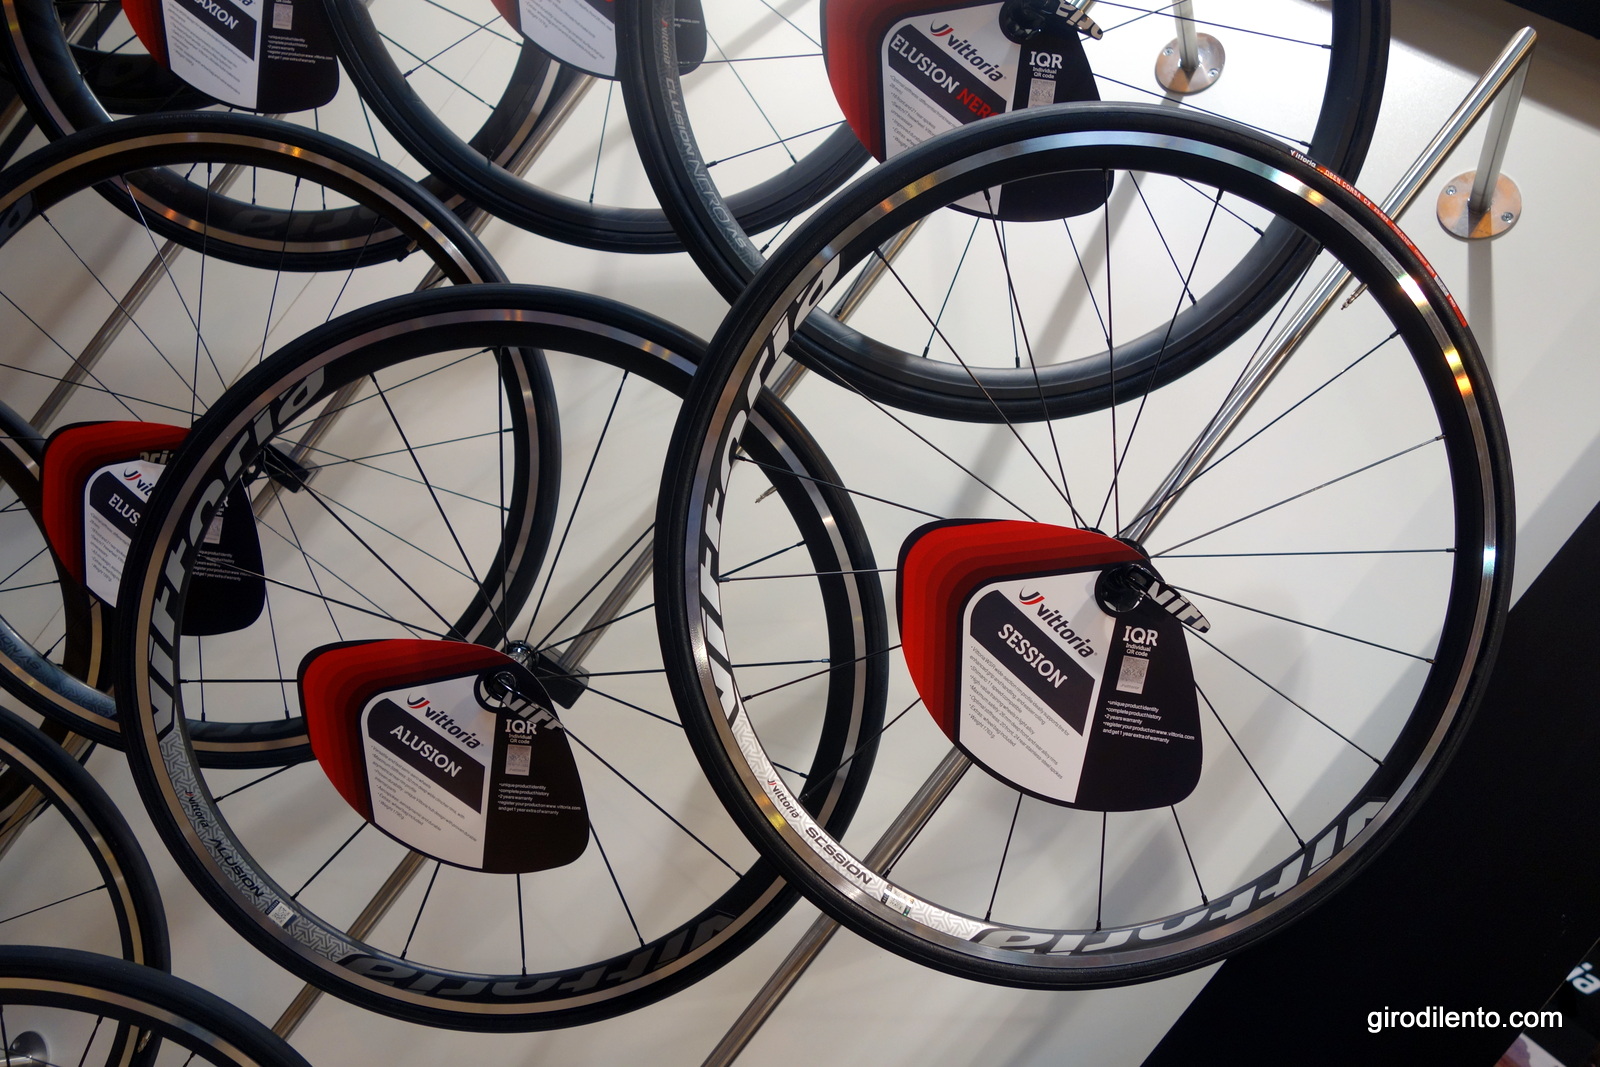 New Vittoria wheels - these are some of the alloy ones